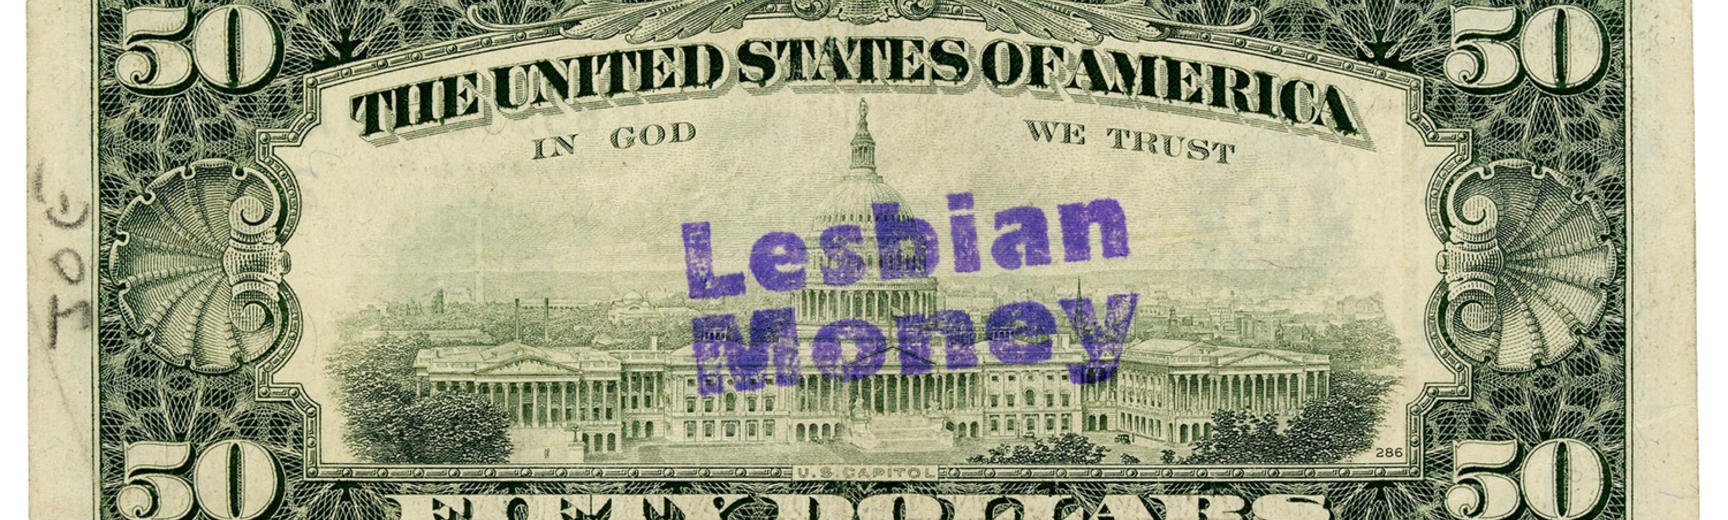 $50 US banknote countermarked with the words ‘Lesbian Money’